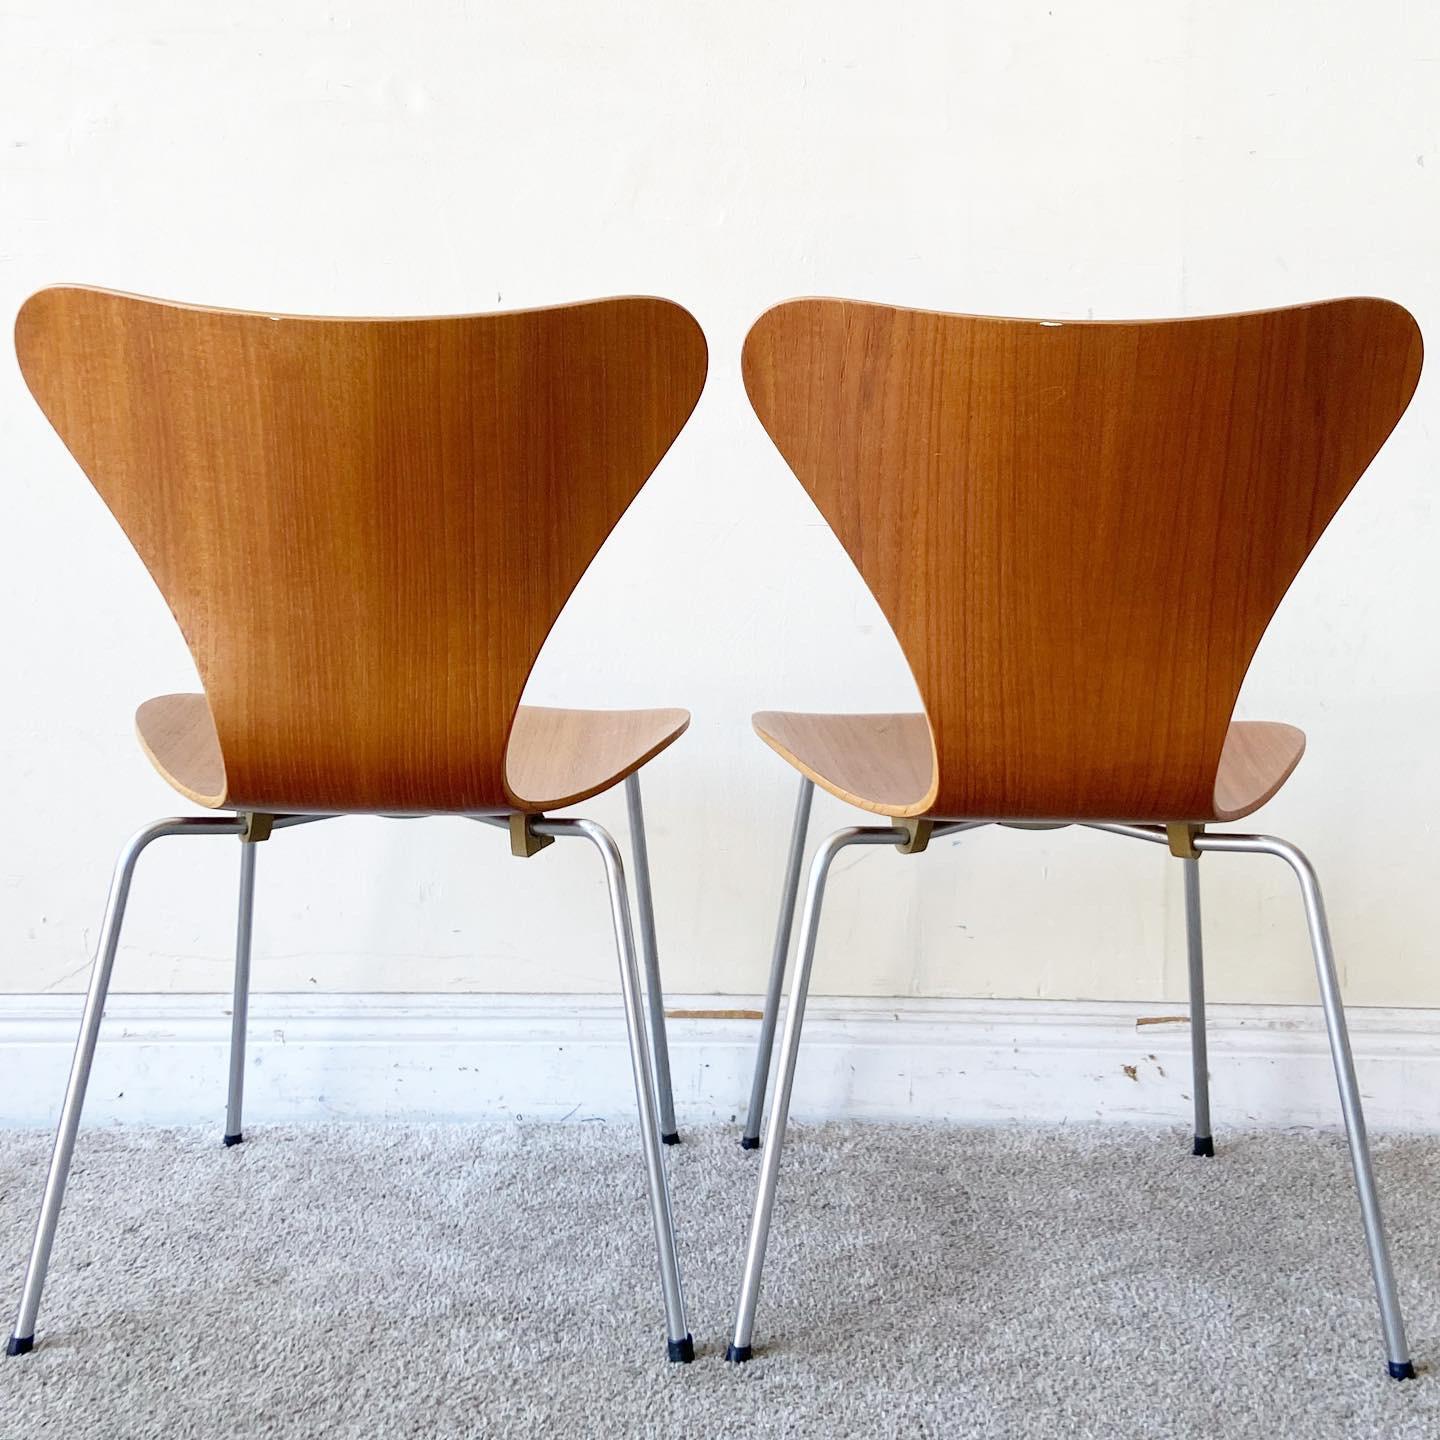 Discover this remarkable set of four Arne Jacobsen Danish Bentwood Chairs, model 3107, designed by Arne Jacobsen for Fritz Hansen. These iconic Mid Century Modern Danish Bentwood Chairs embody timeless elegance and unparalleled craftsmanship, making